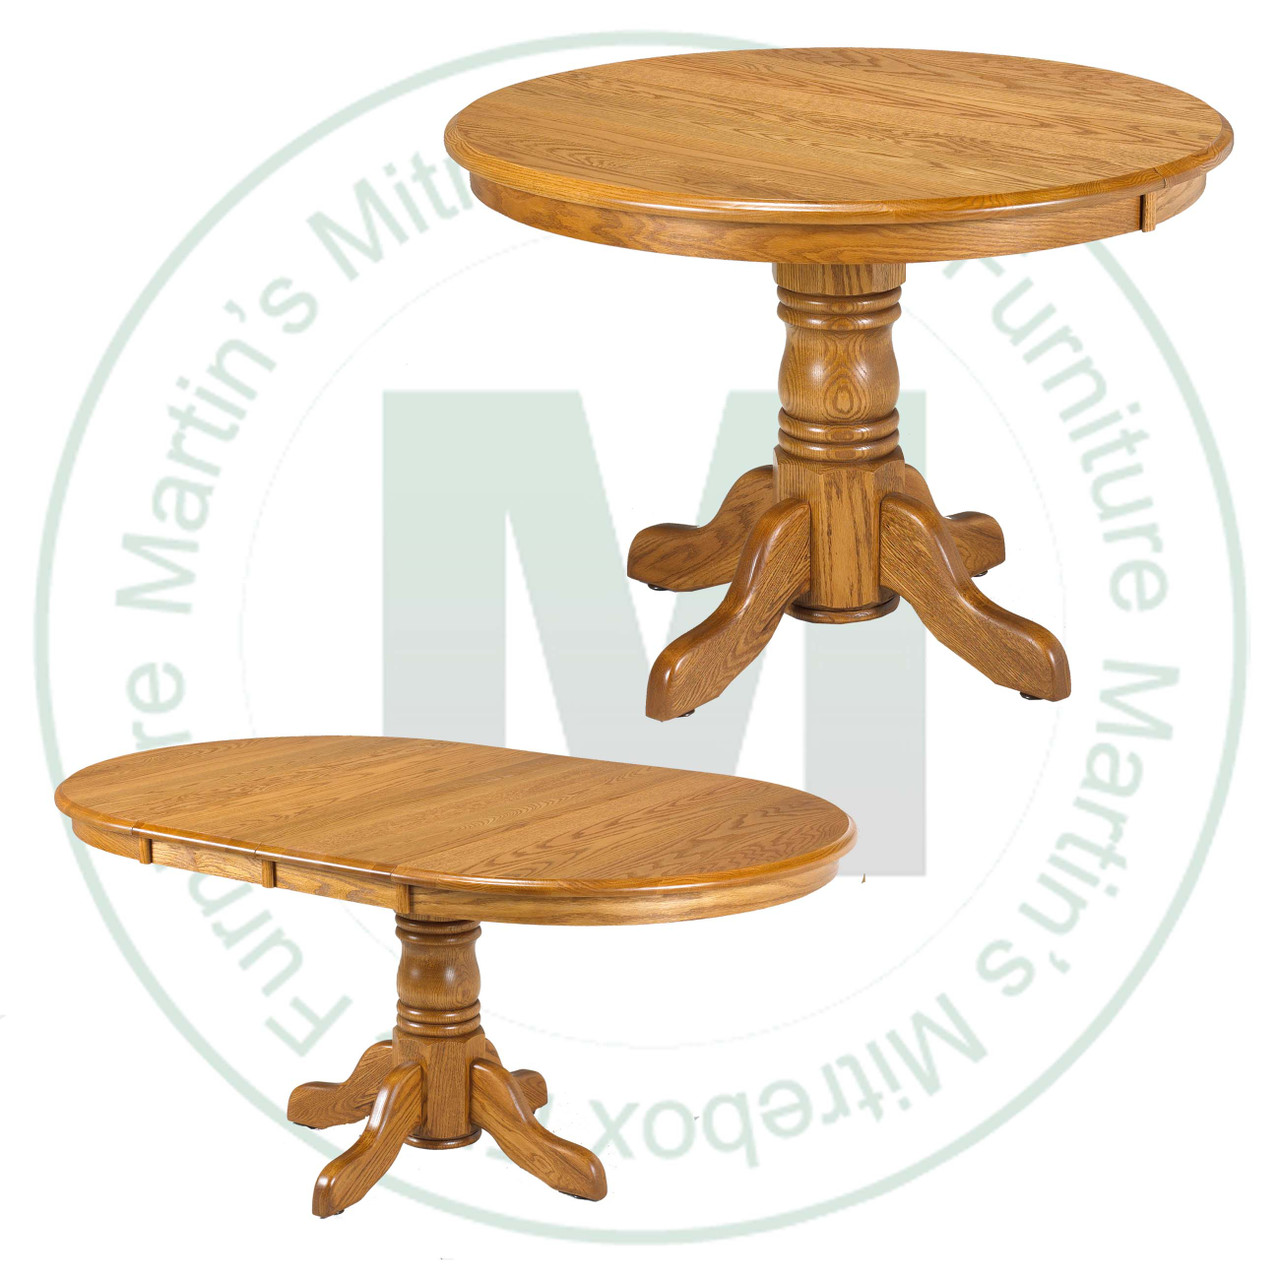 Wormy Maple Lancaster Collection Single Pedestal Table 42''D x 42''W x 30''H With 1 - 12'' Leaf. Table Has 1.25'' Thick Top